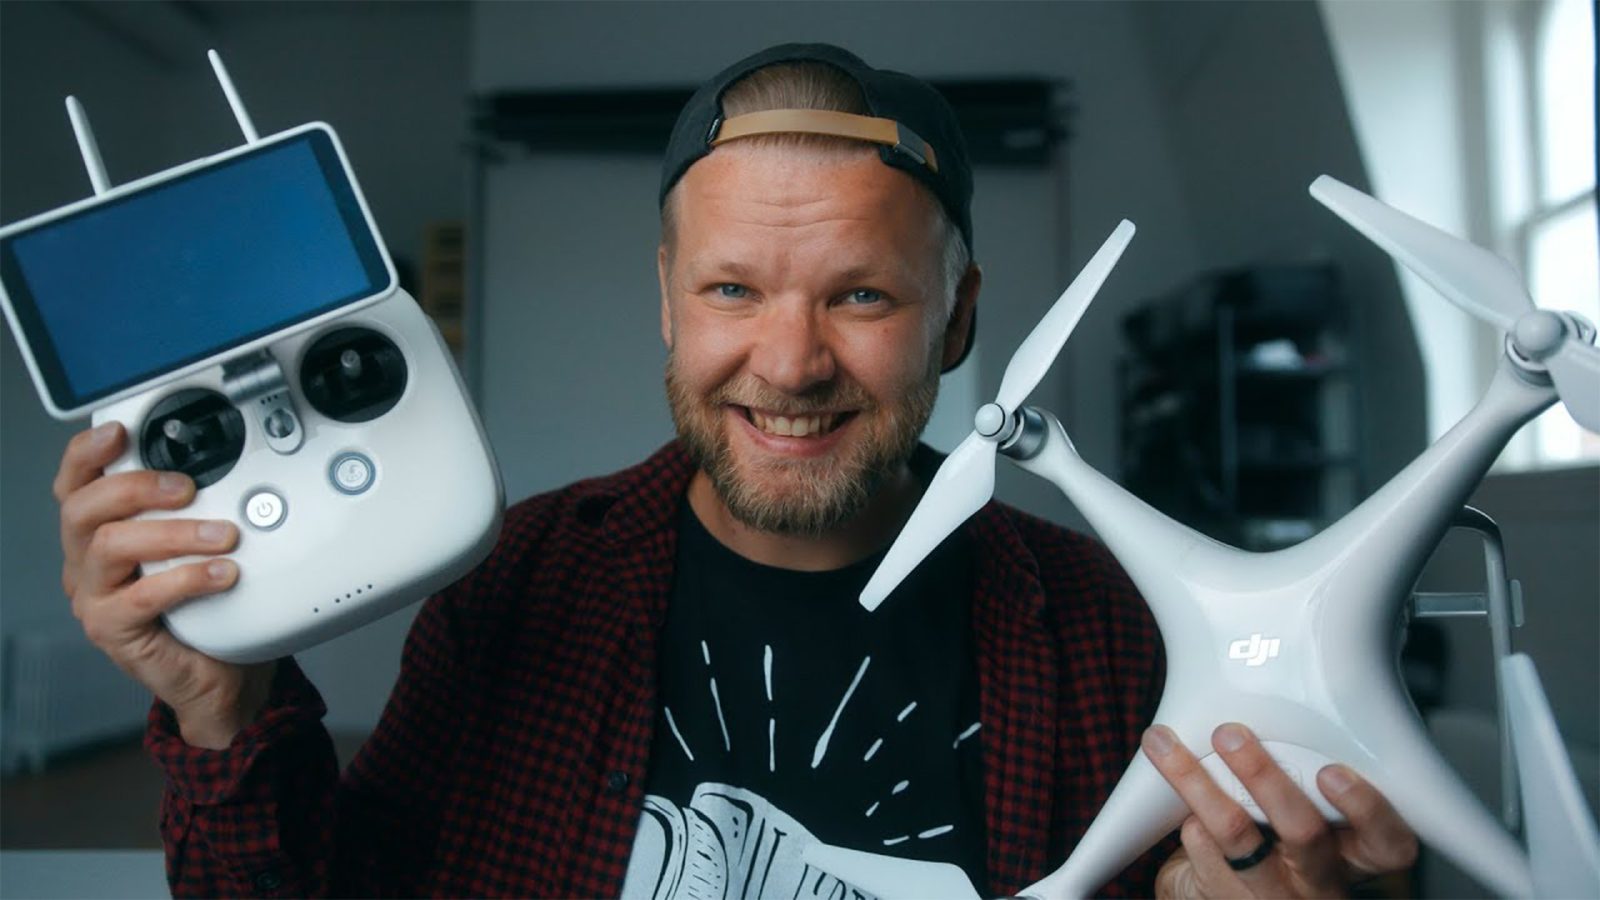 Here are 5 quick tips to "Get Good At Drone Flying" by Matti Haapoja!